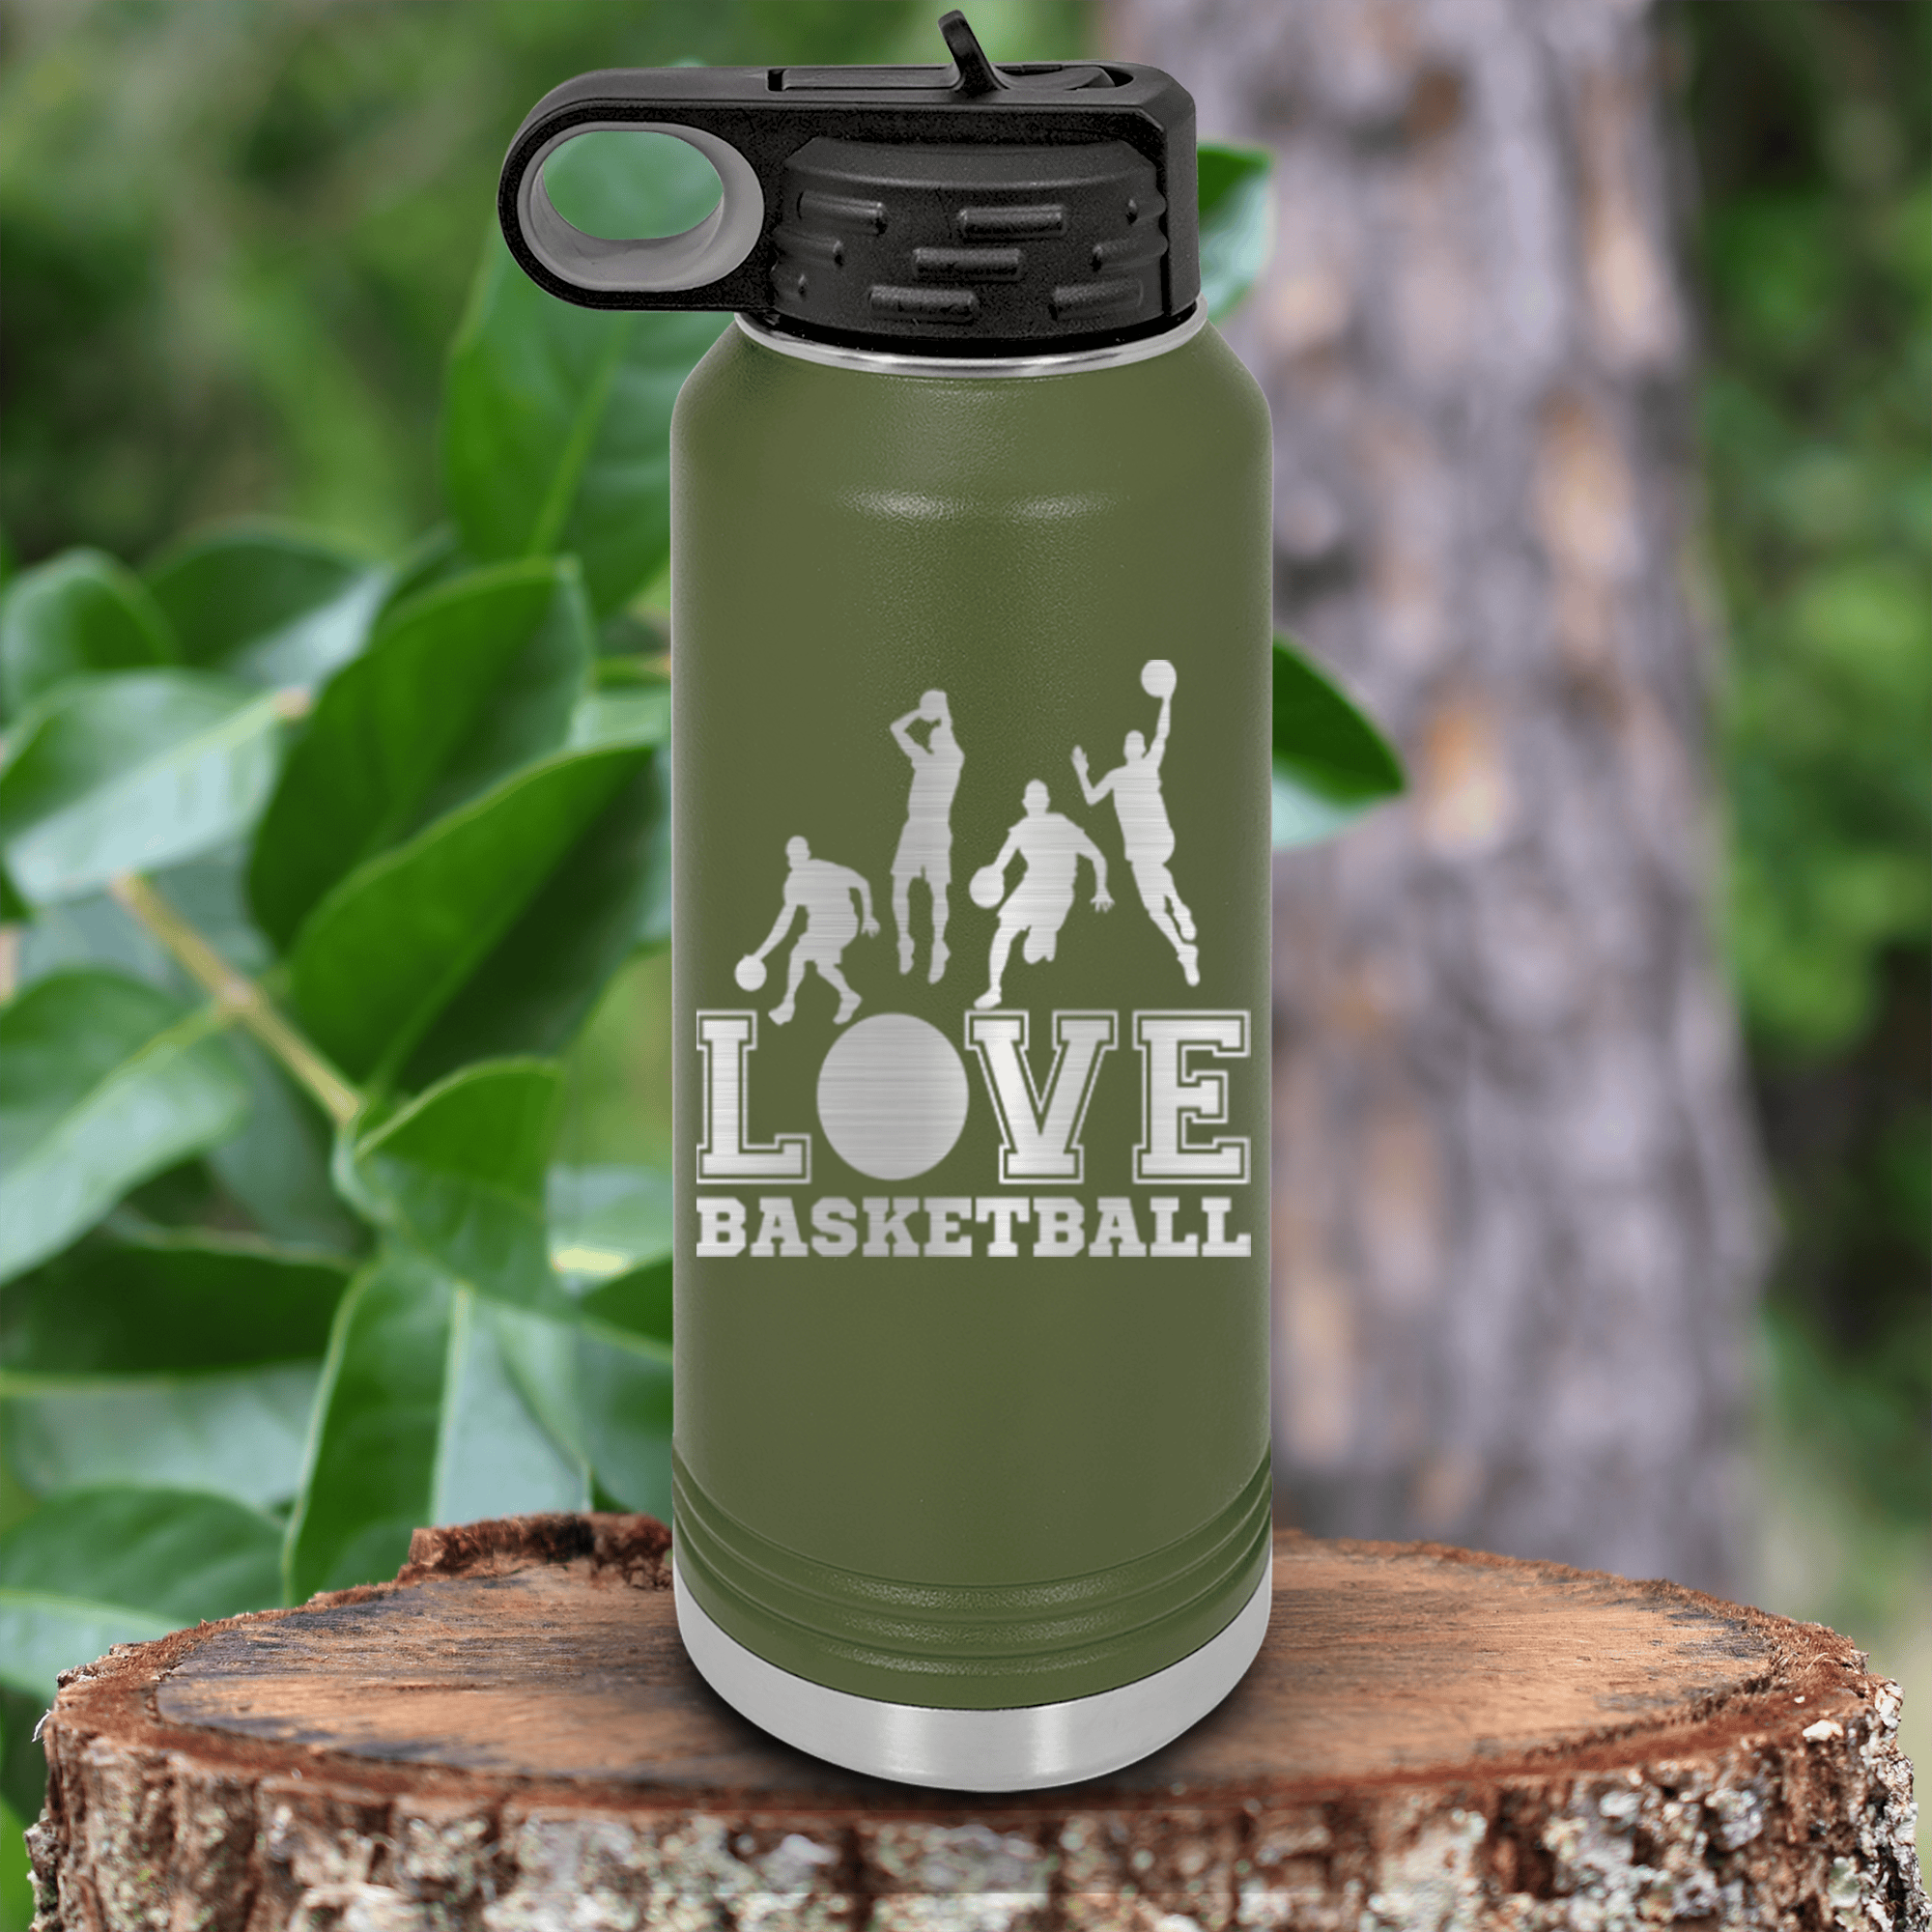 Military Green Basketball Water Bottle With Heart Beats For Basketball Design